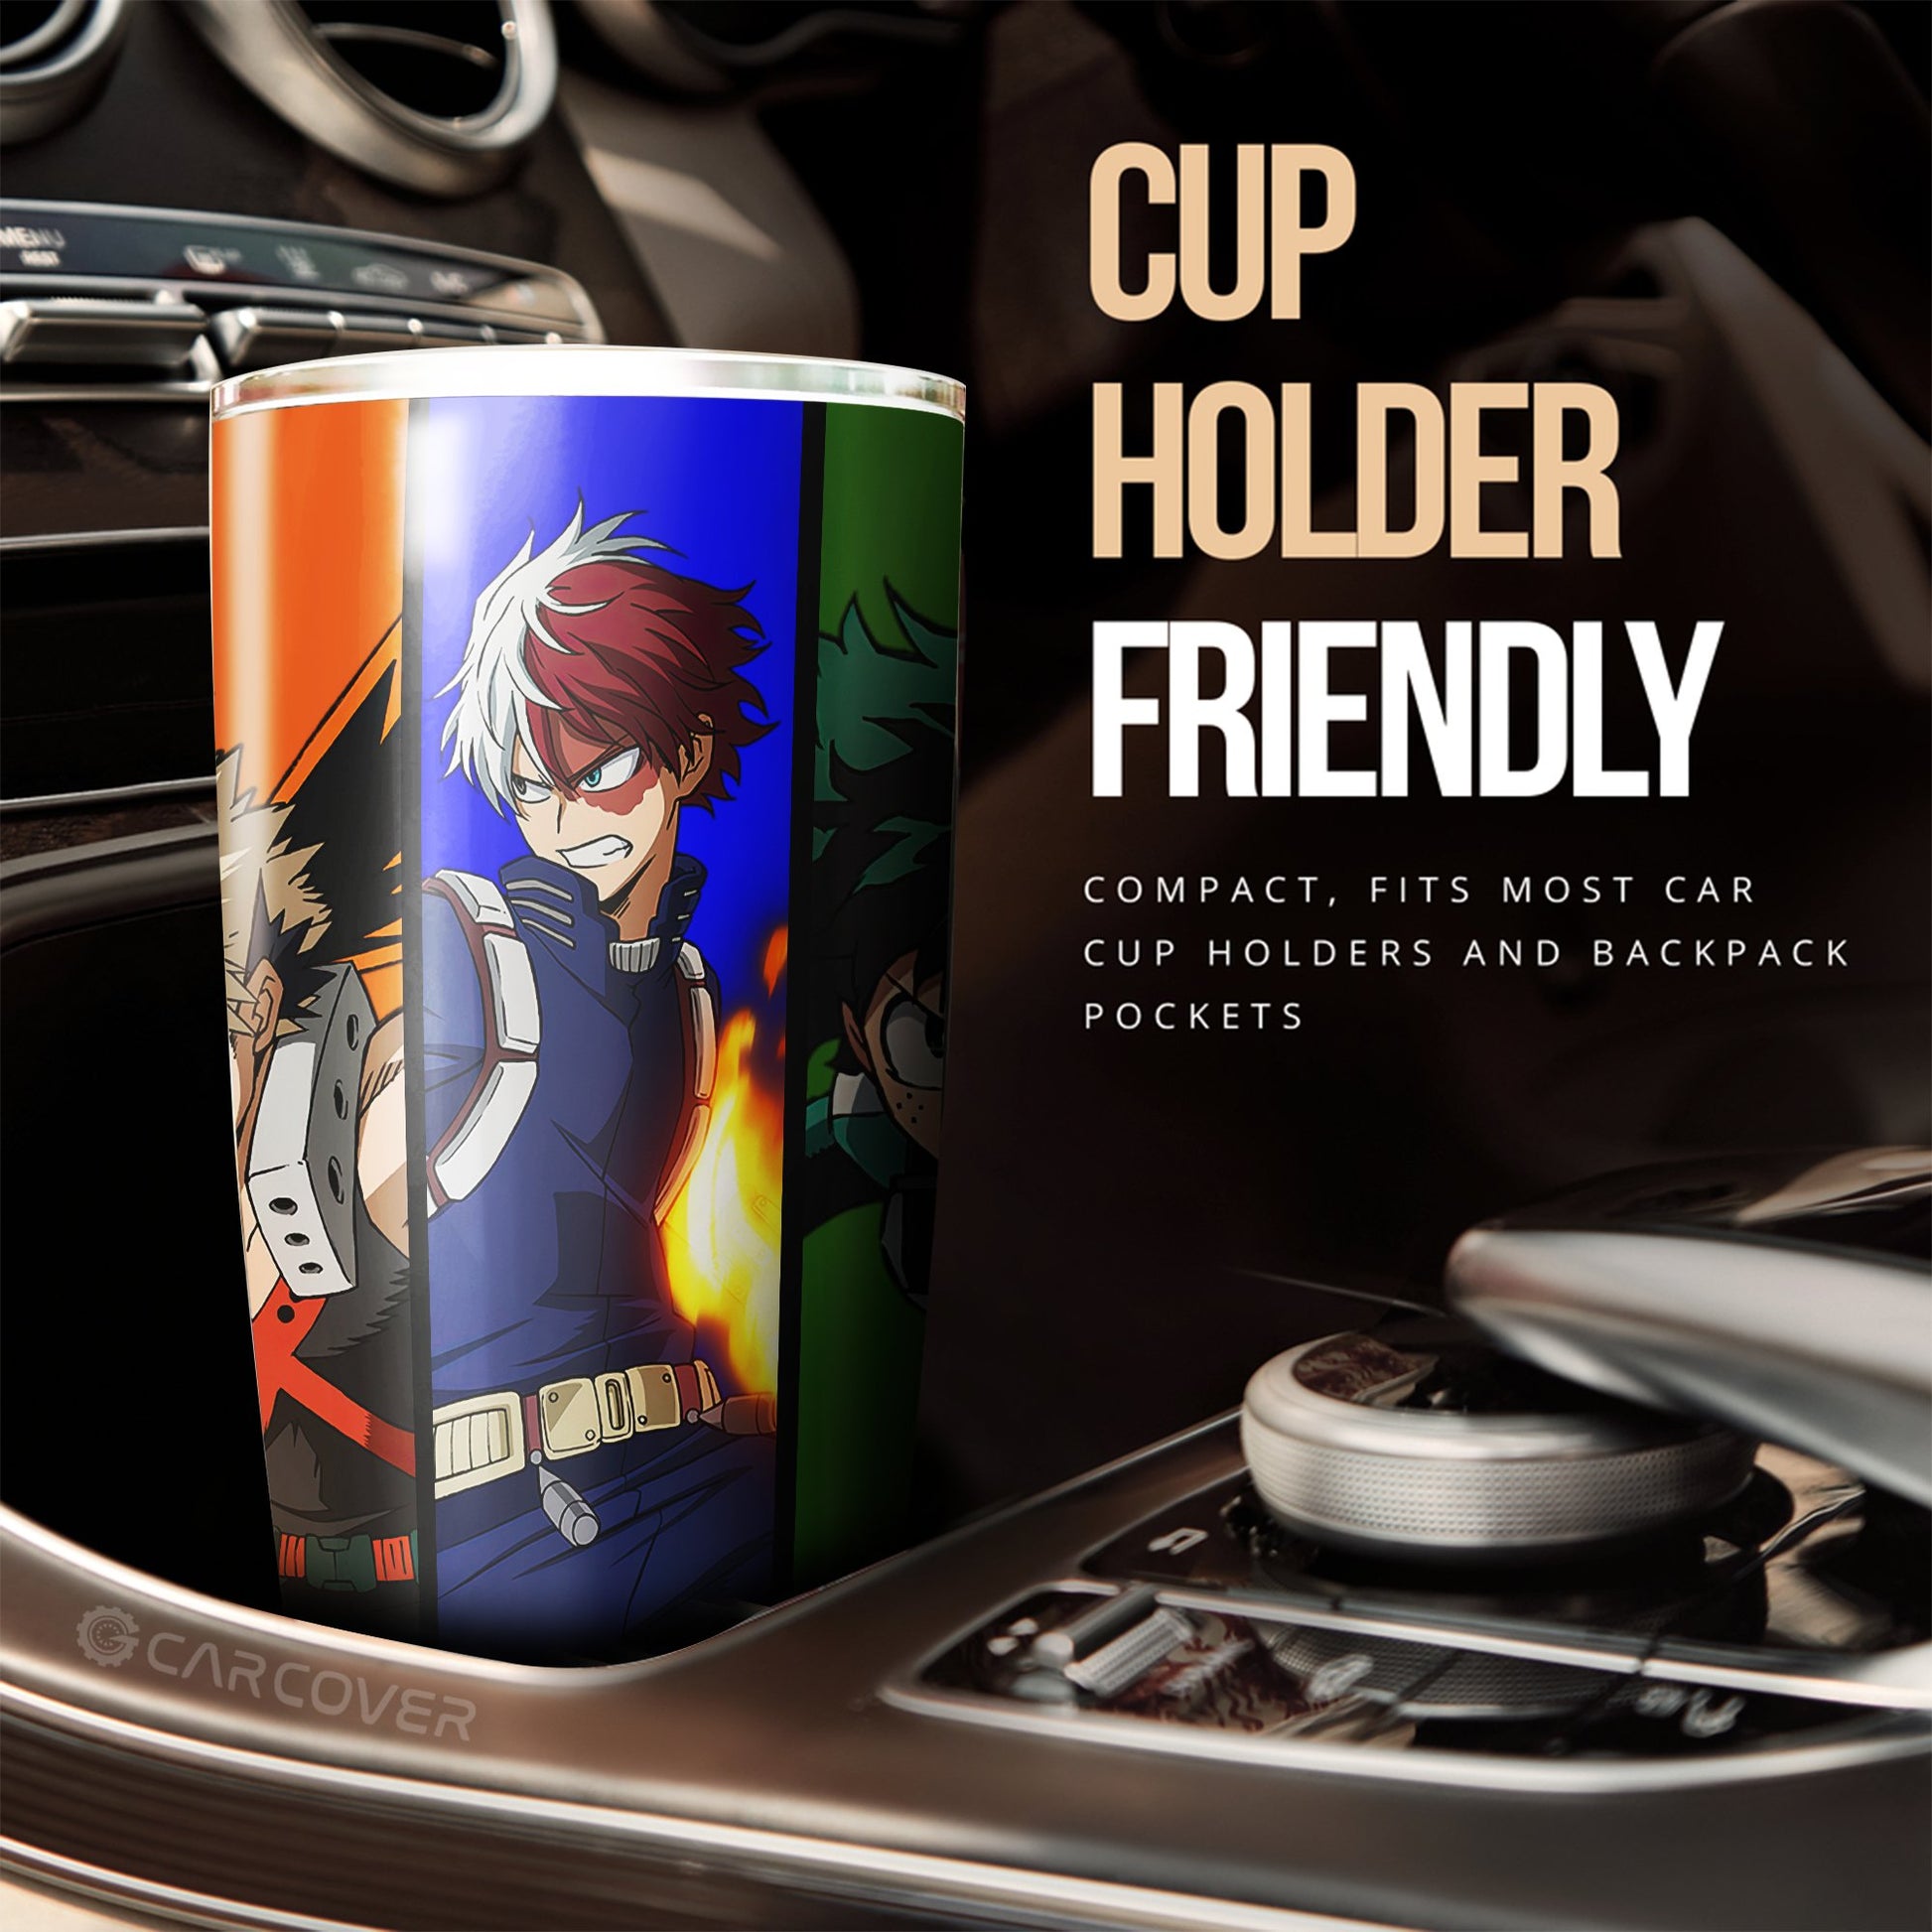 Three Musketeers Tumbler Cup Custom Anime My Hero Academia Car Accessories - Gearcarcover - 2